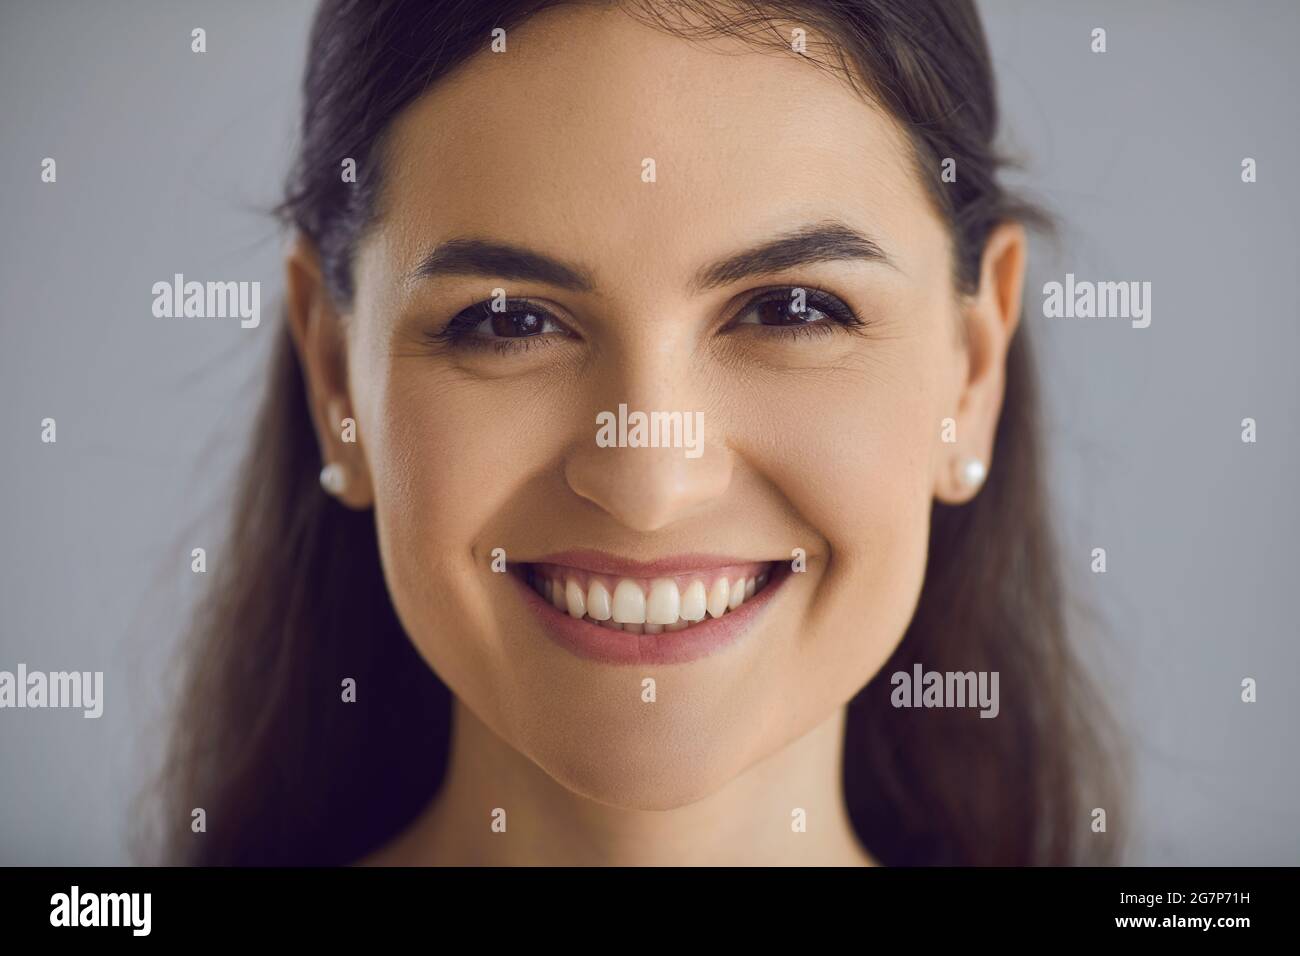 Head shot of happy young woman with long dark hair and friendly open smile looking at camera Stock Photo